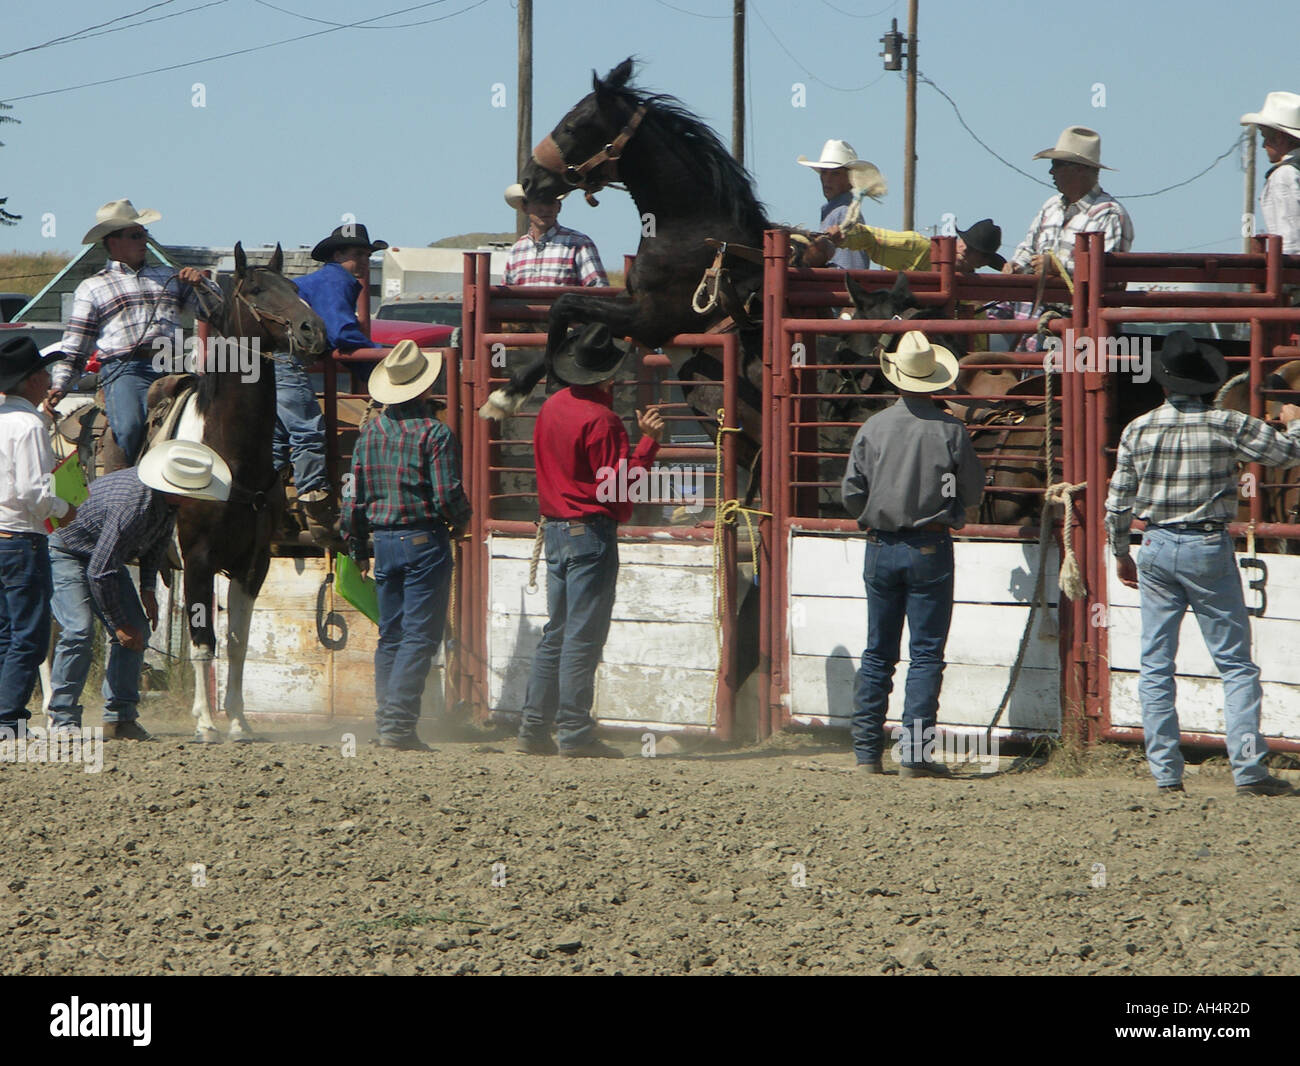 Horse Rearing Up In Chute Stock Photo